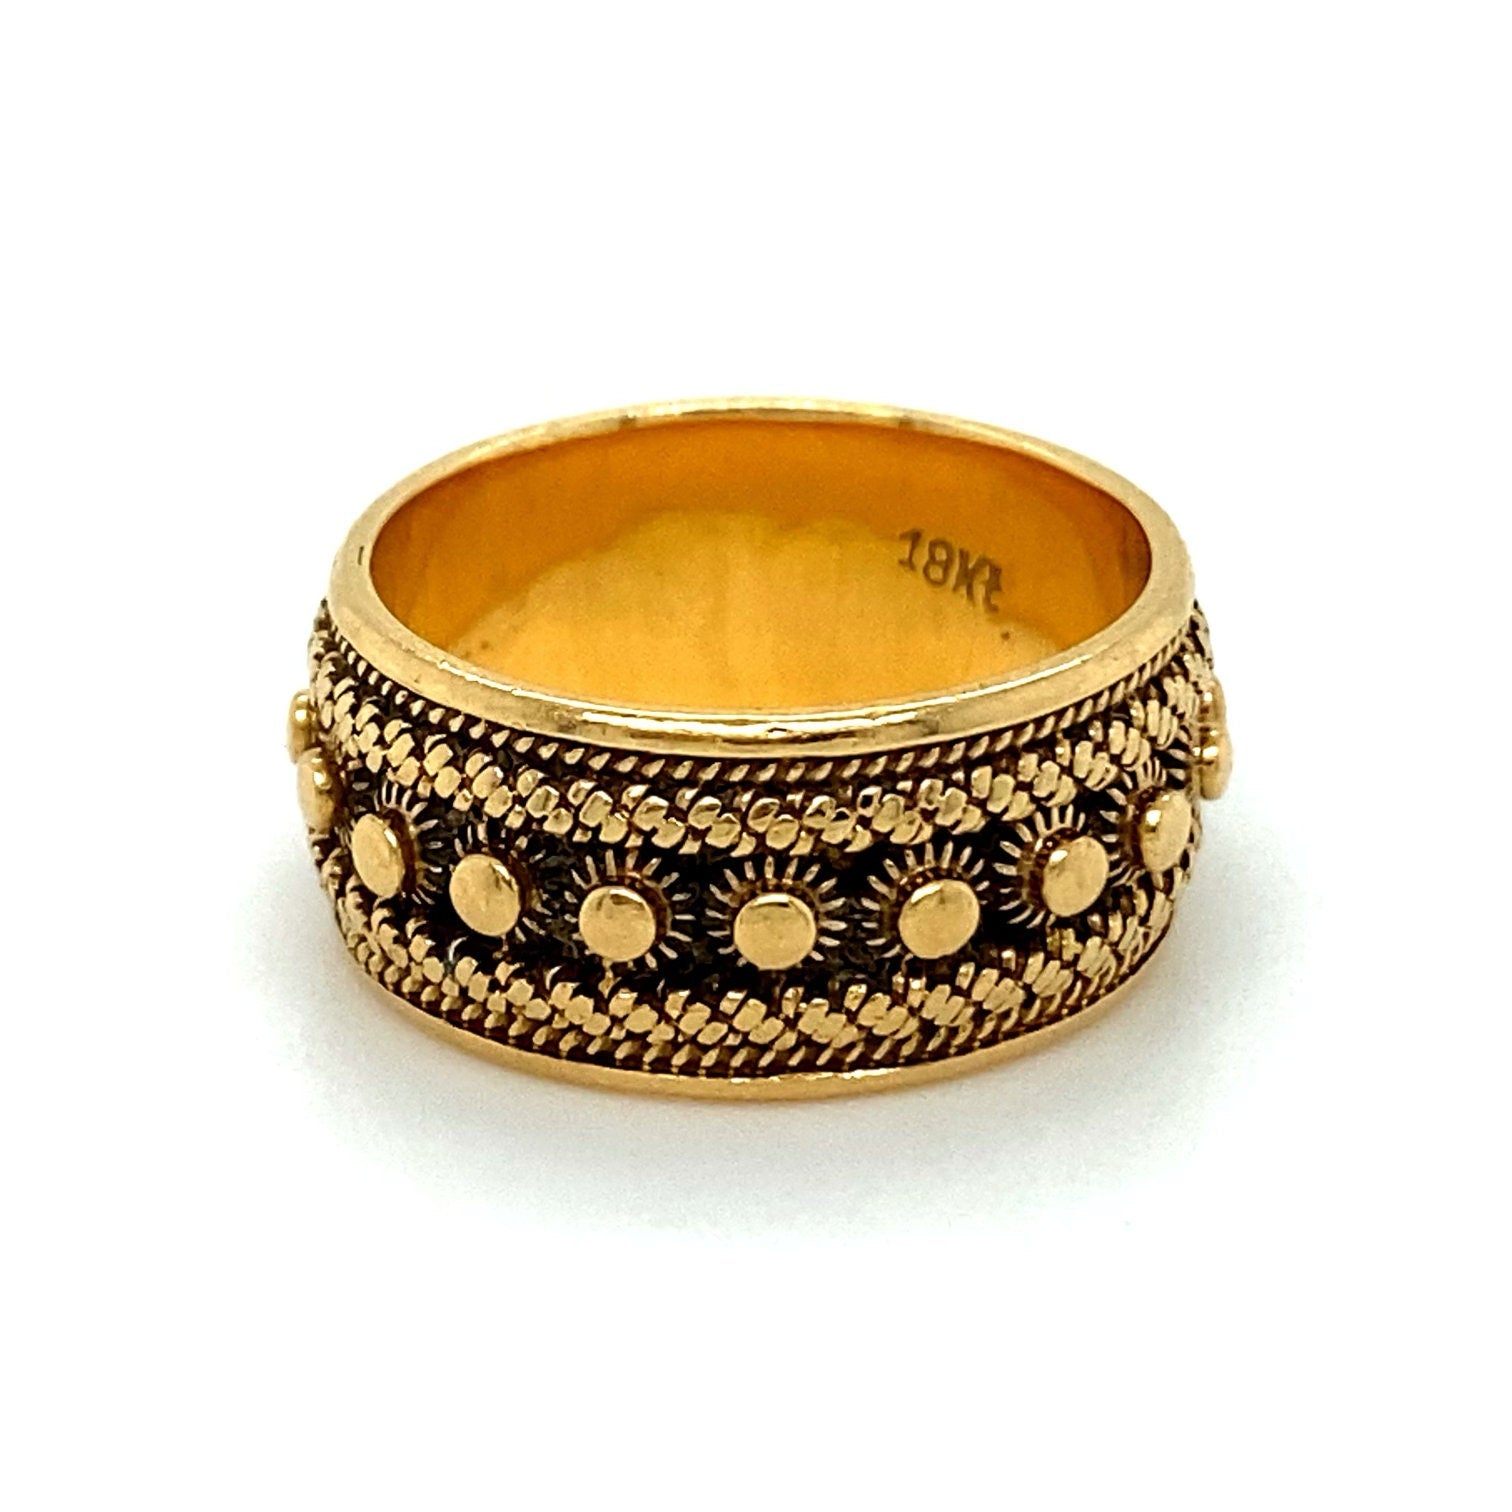 Amazing Vintage Sun Patterned 18K Yellow Gold Wide Wedding Band.